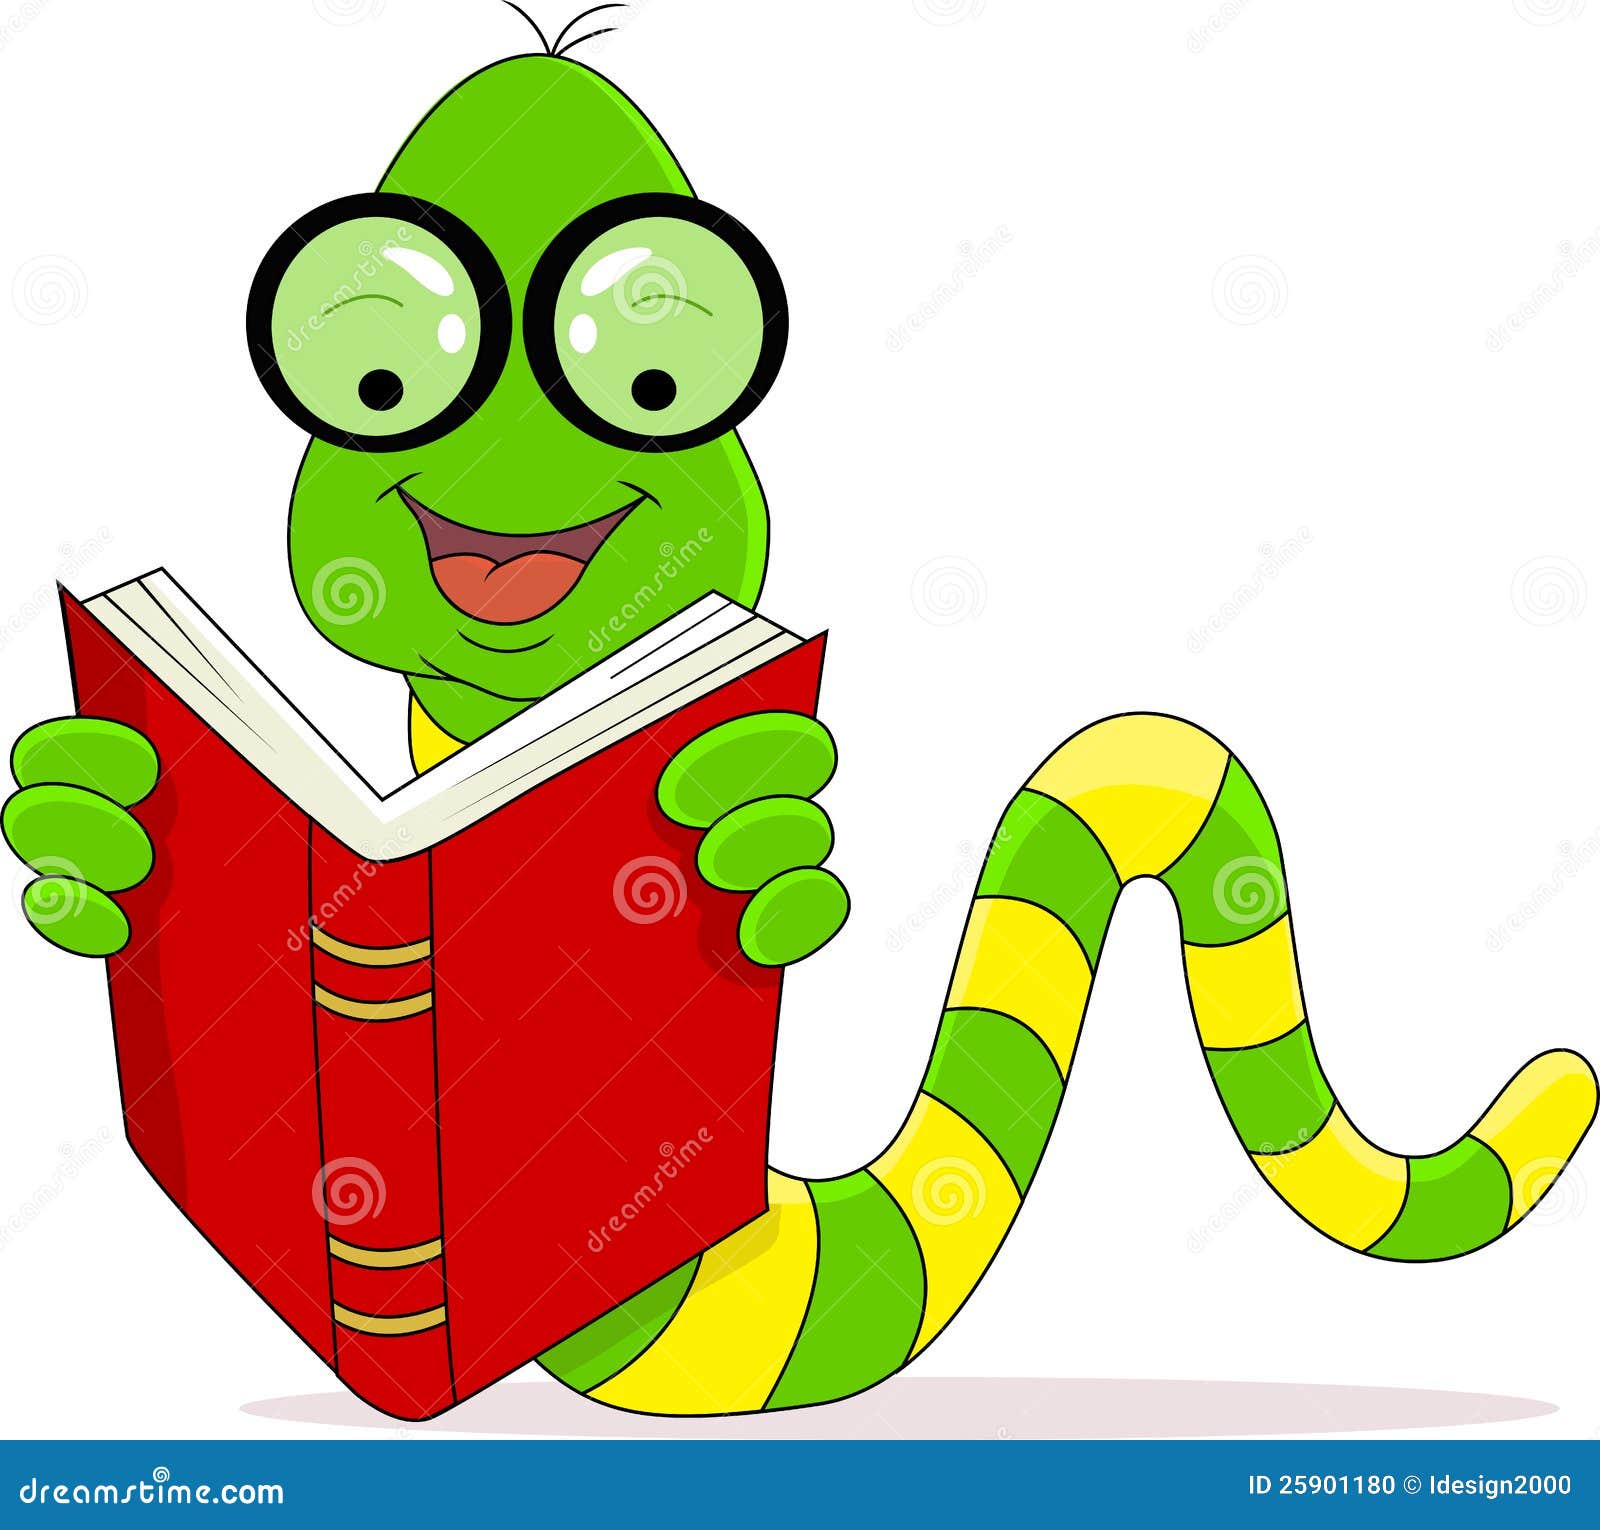 clipart bookworm with glasses - photo #19